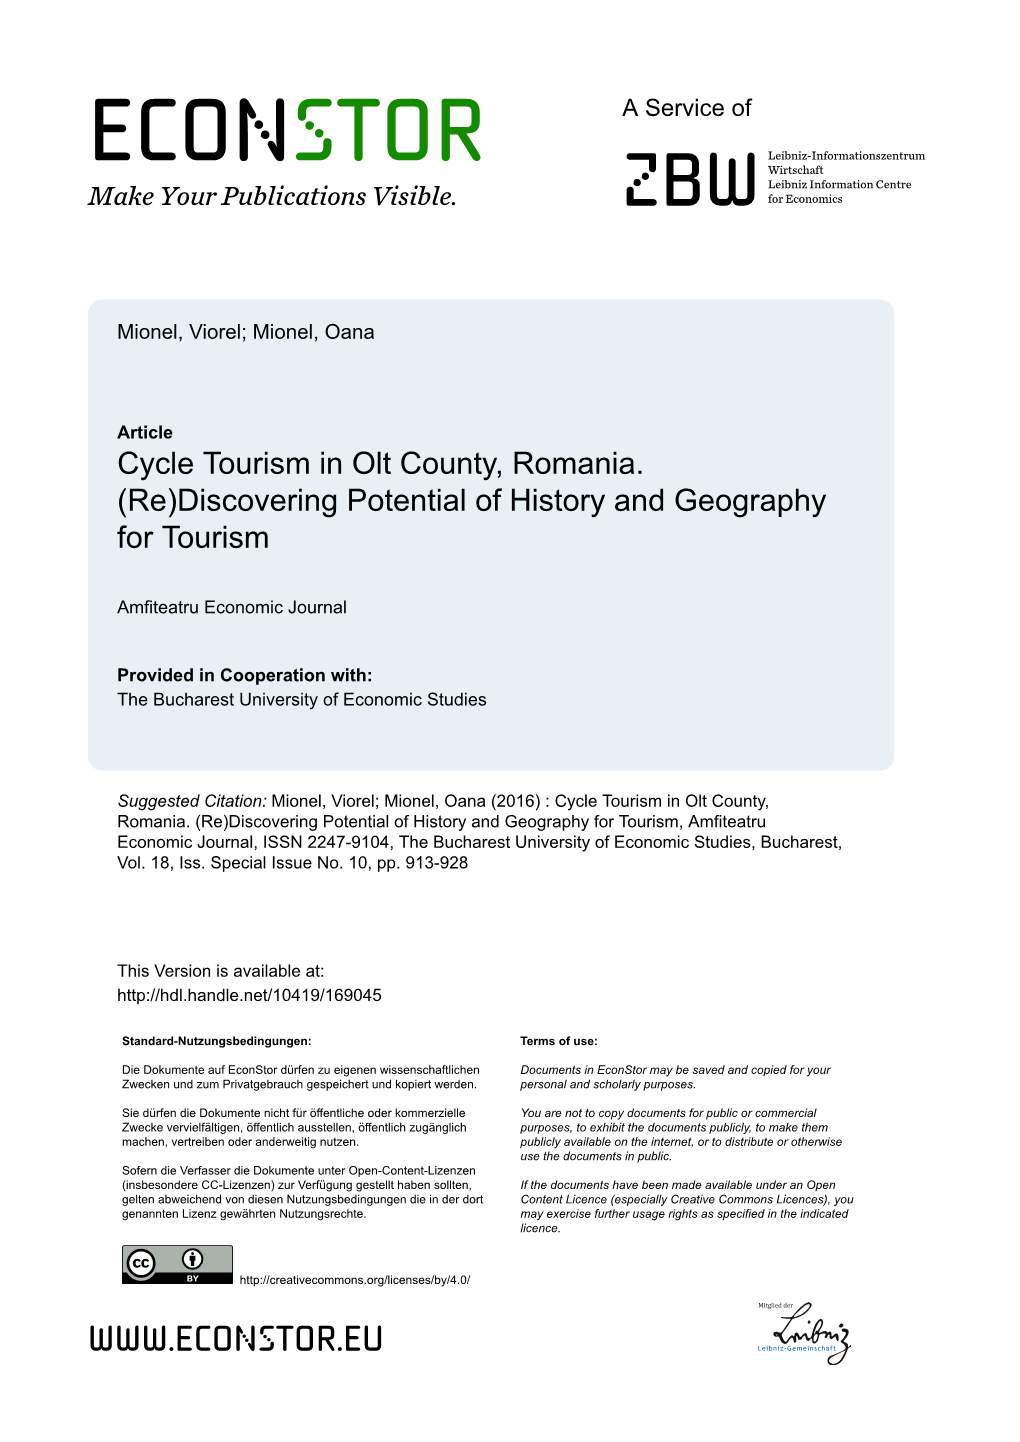 Cycle Tourism in Olt County, Romania. (Re)Discovering Potential of History and Geography for Tourism